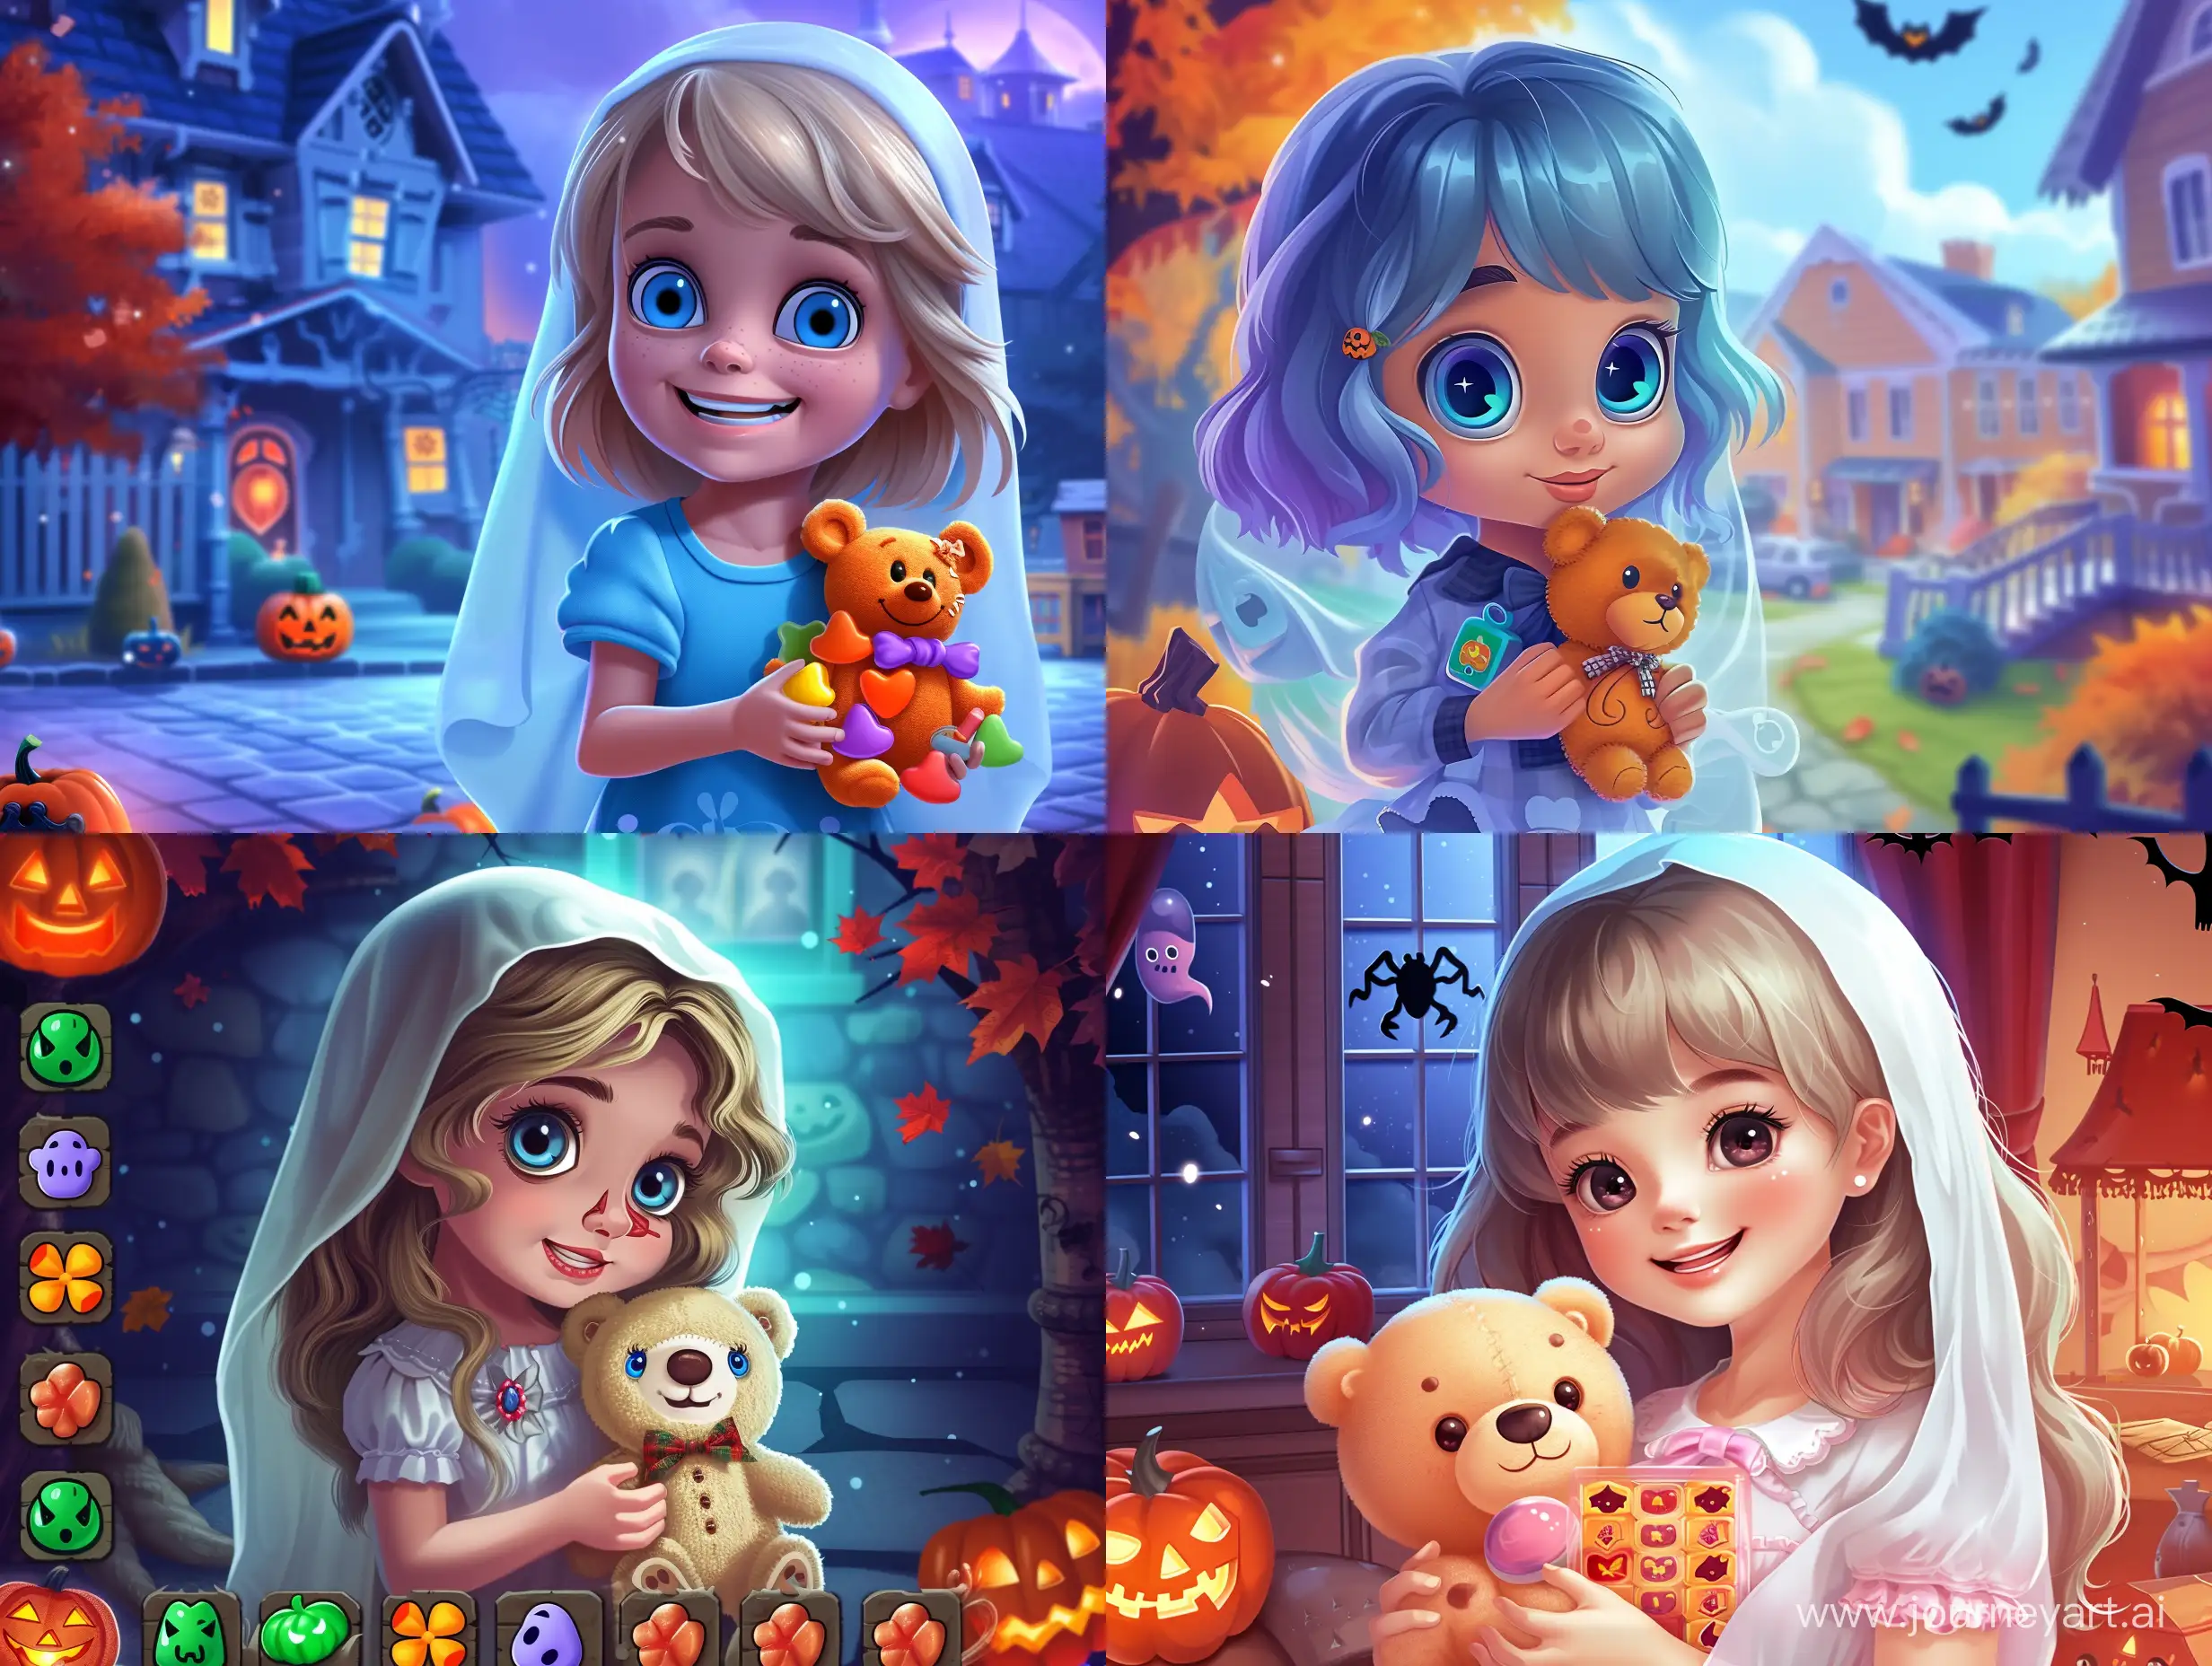 Spooky-Halloween-Match3-Game-Screensaver-Featuring-Ghost-Girl-and-Plush-ToyBear